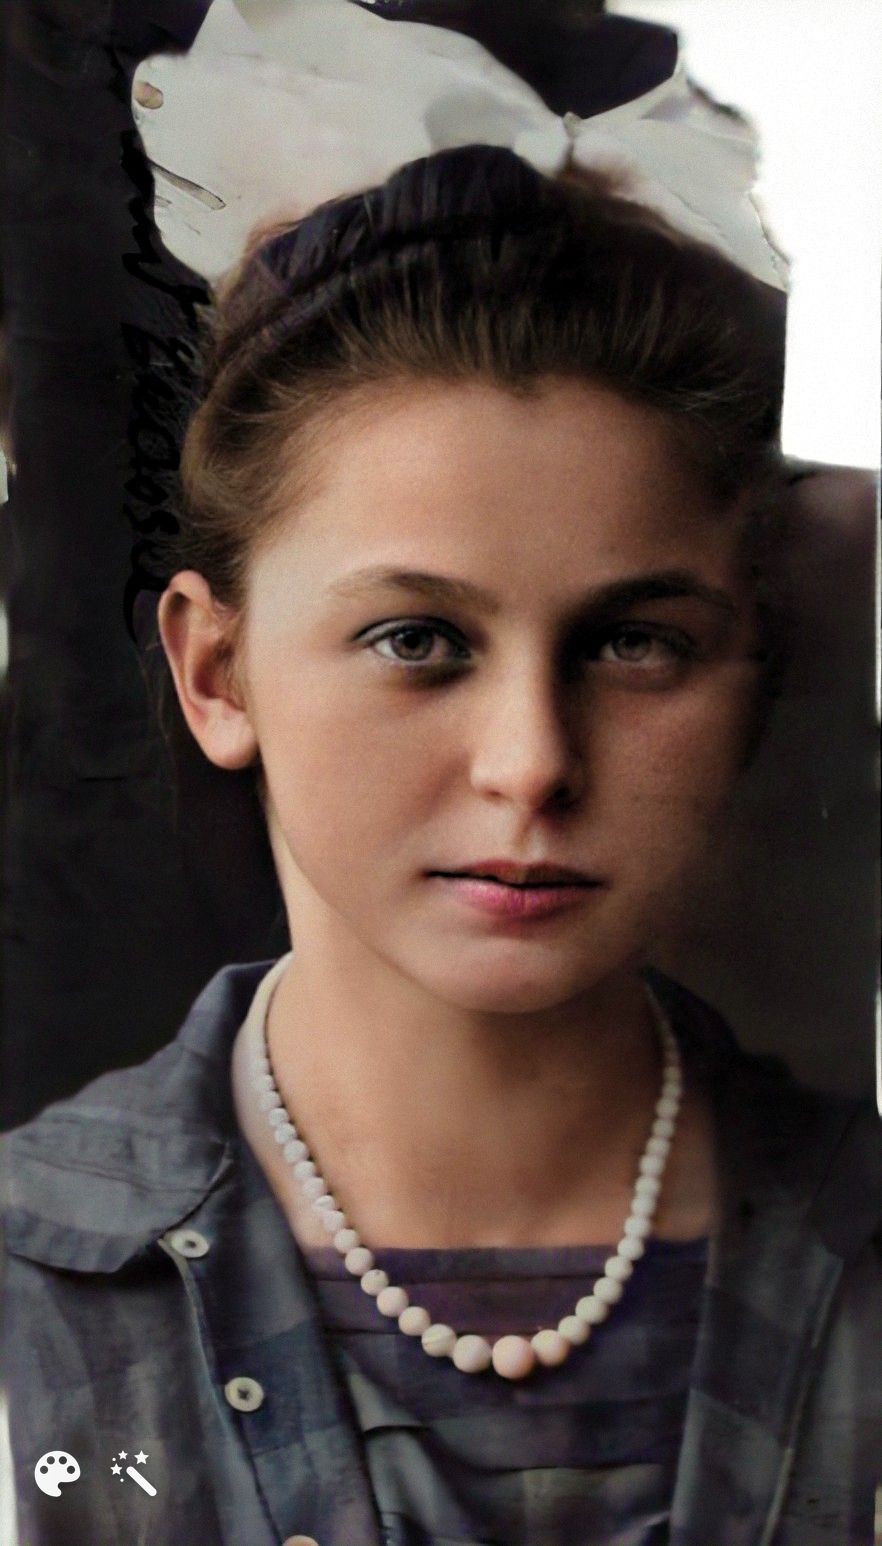 Jürgen's mother as a young woman in Hohenstein-Ernstthal. Photo repaired and colorized with MyHeritage